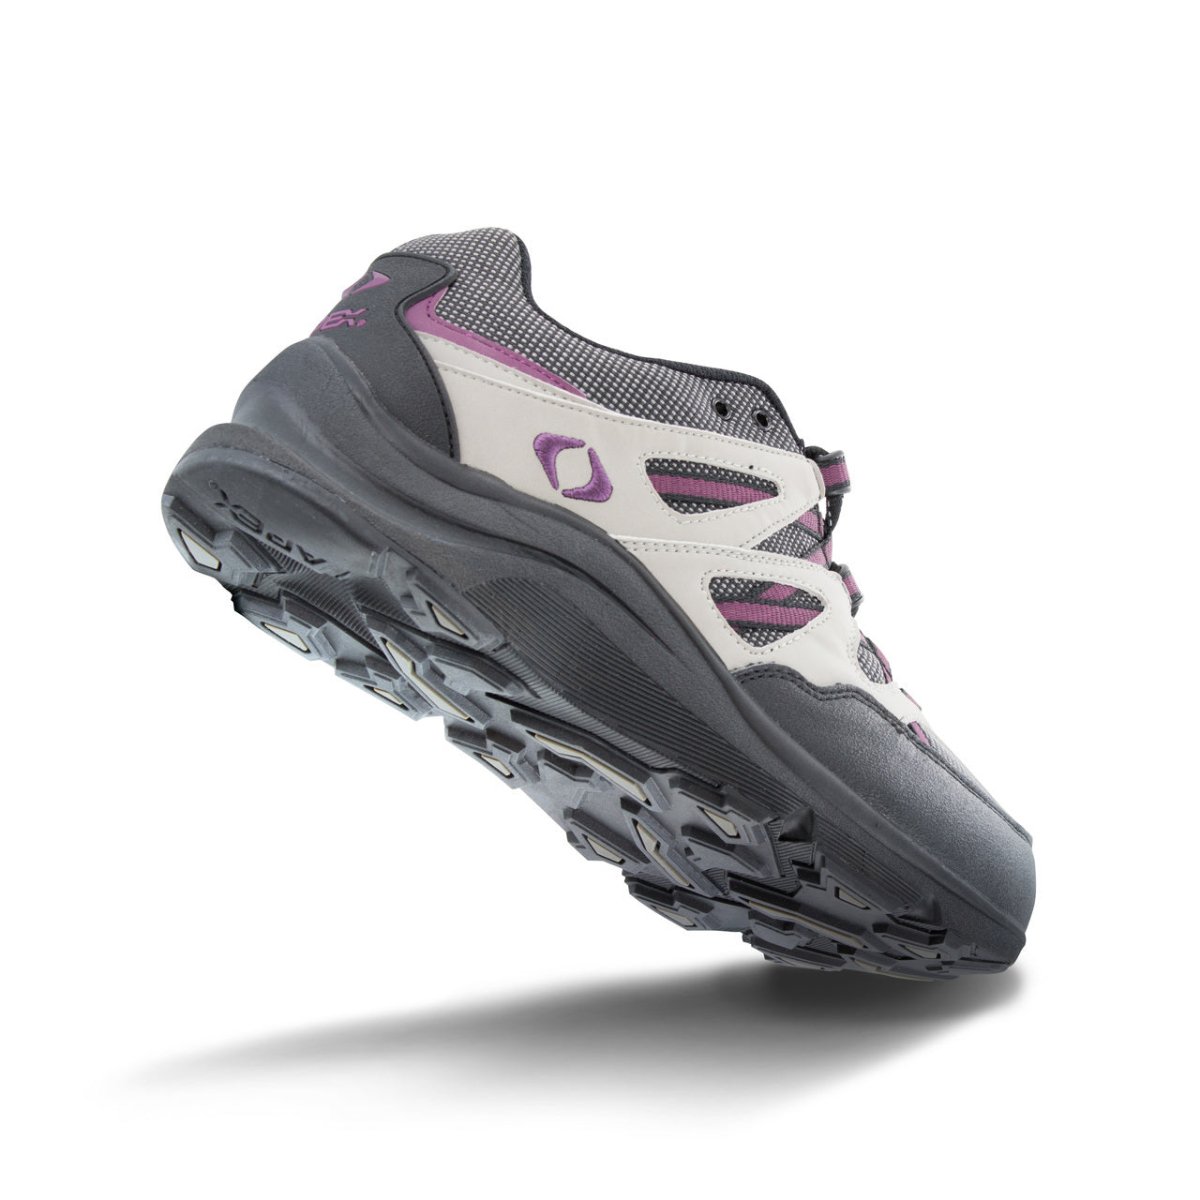 APEX V753 TRAIL RUN WOMEN'S ACTIVE SHOE IN GRAY/PURPLE - TLW Shoes